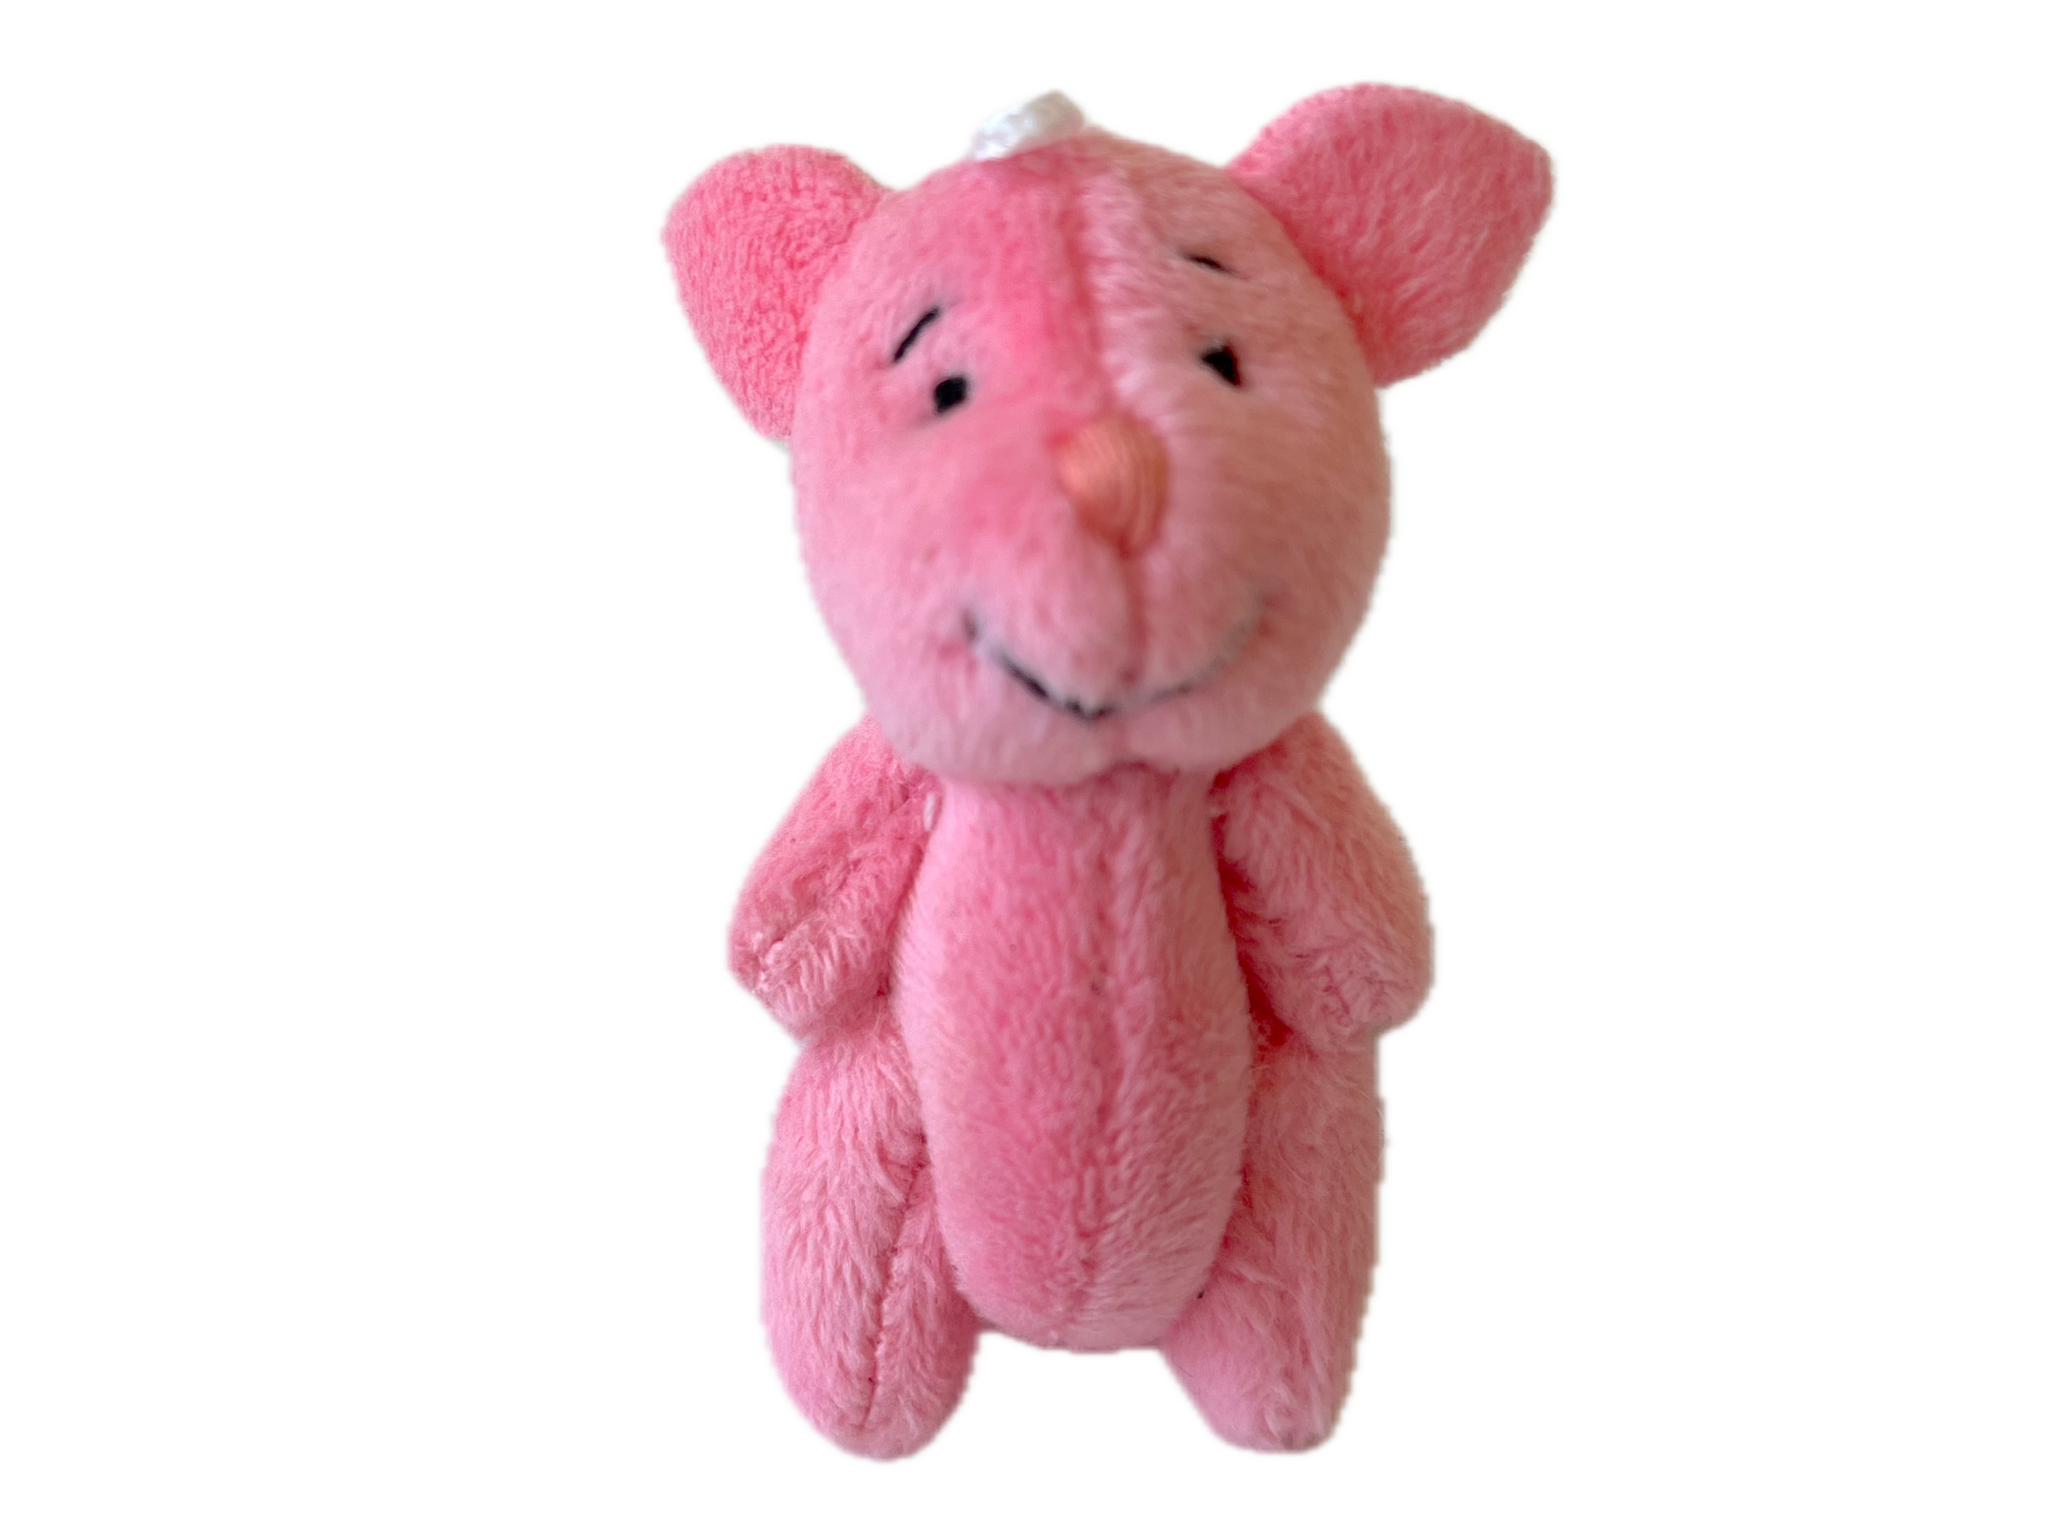 Plush Pig Miniature Stuffed Pink Pig Doll Accessory Dollhouse Craft Supply Backpack Pendant Party Favor